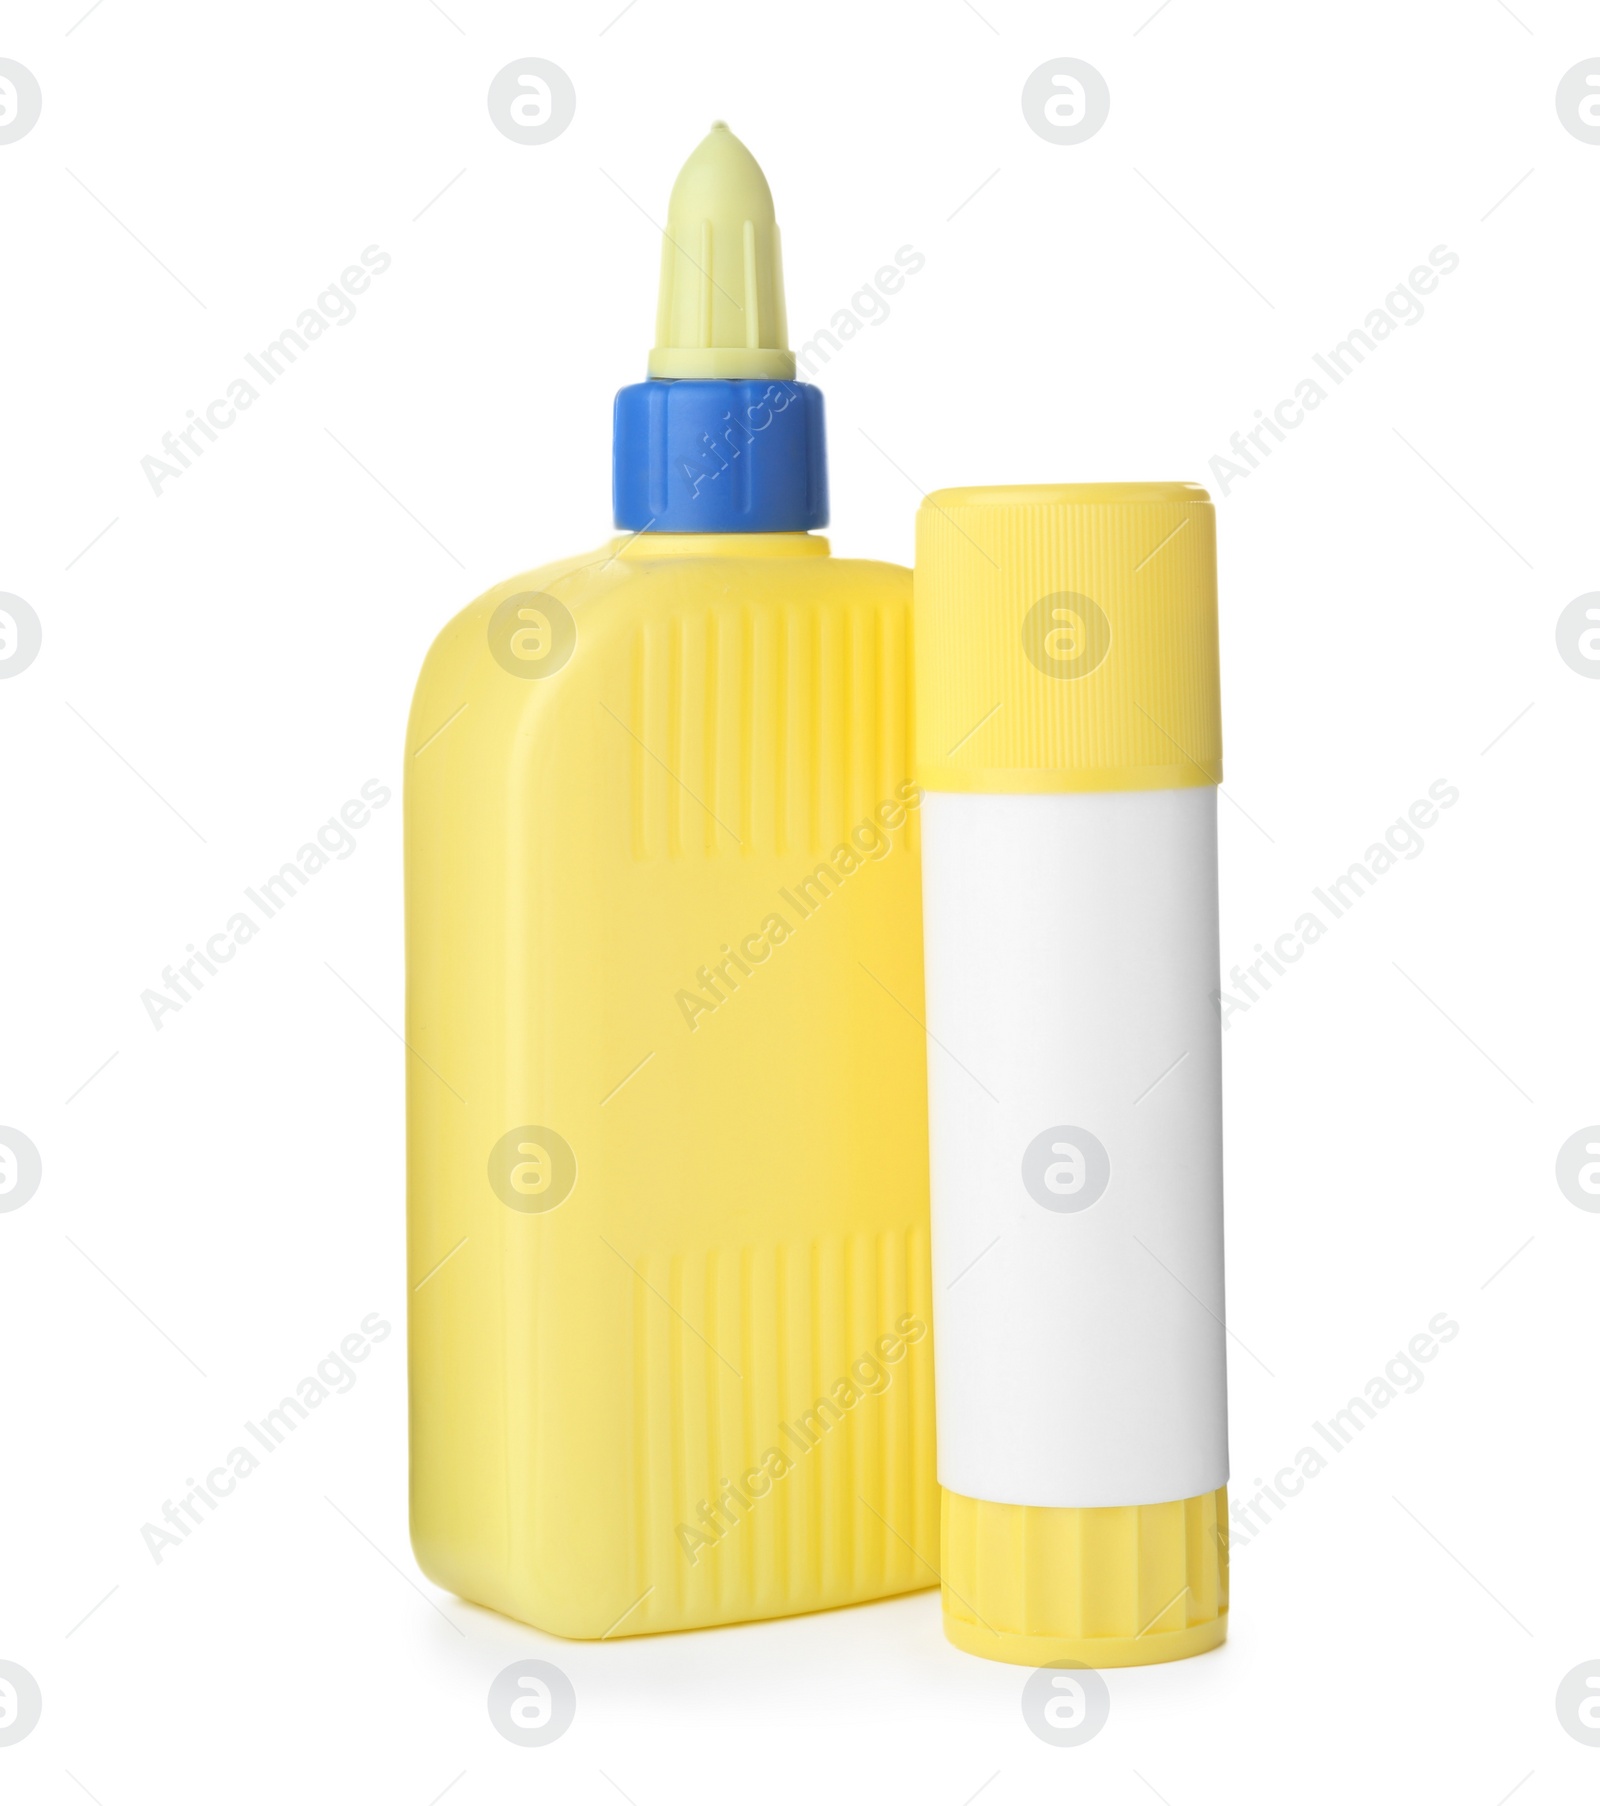 Photo of Bottle and stick of glue on white background